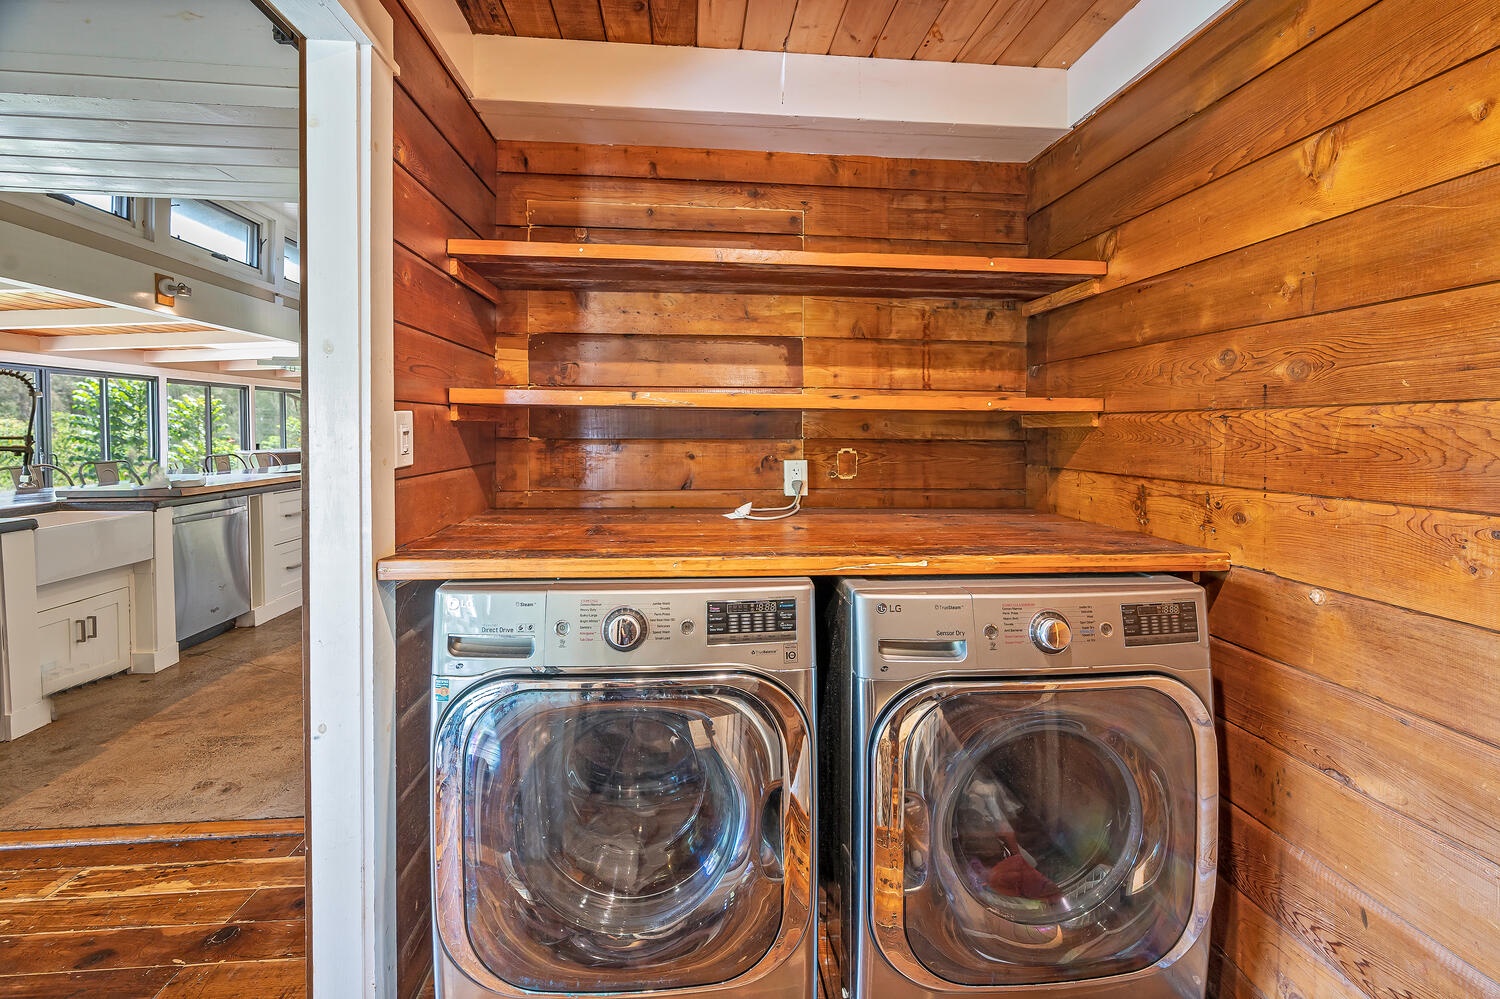 Haleiwa Vacation Rentals, Mele Makana - There is also a full-size washer and dryer in the home for your convenience